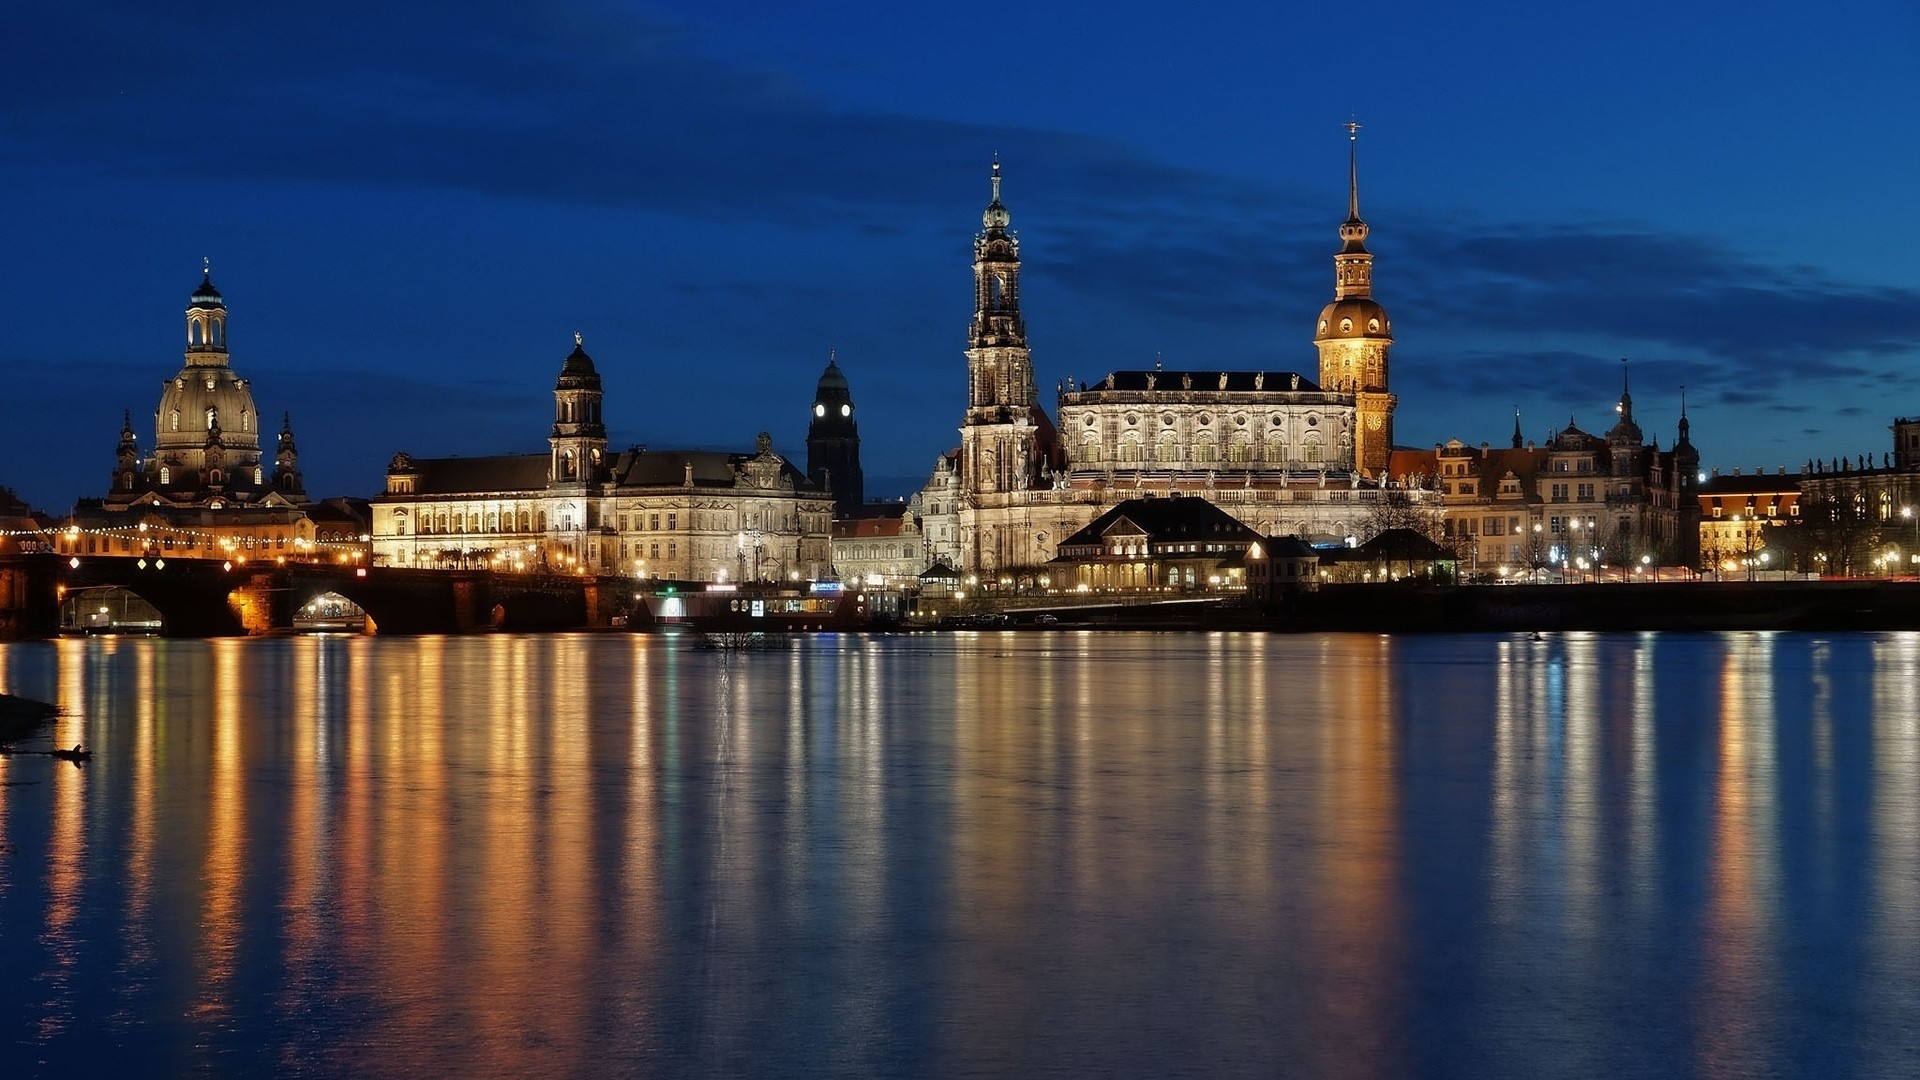 architecture, Old building, Lights, Evening, City, Dresden, Germany, Water, River, Church, Dome, Cathedral, Bridge, Reflection, Trees, Clouds, Tower Wallpaper